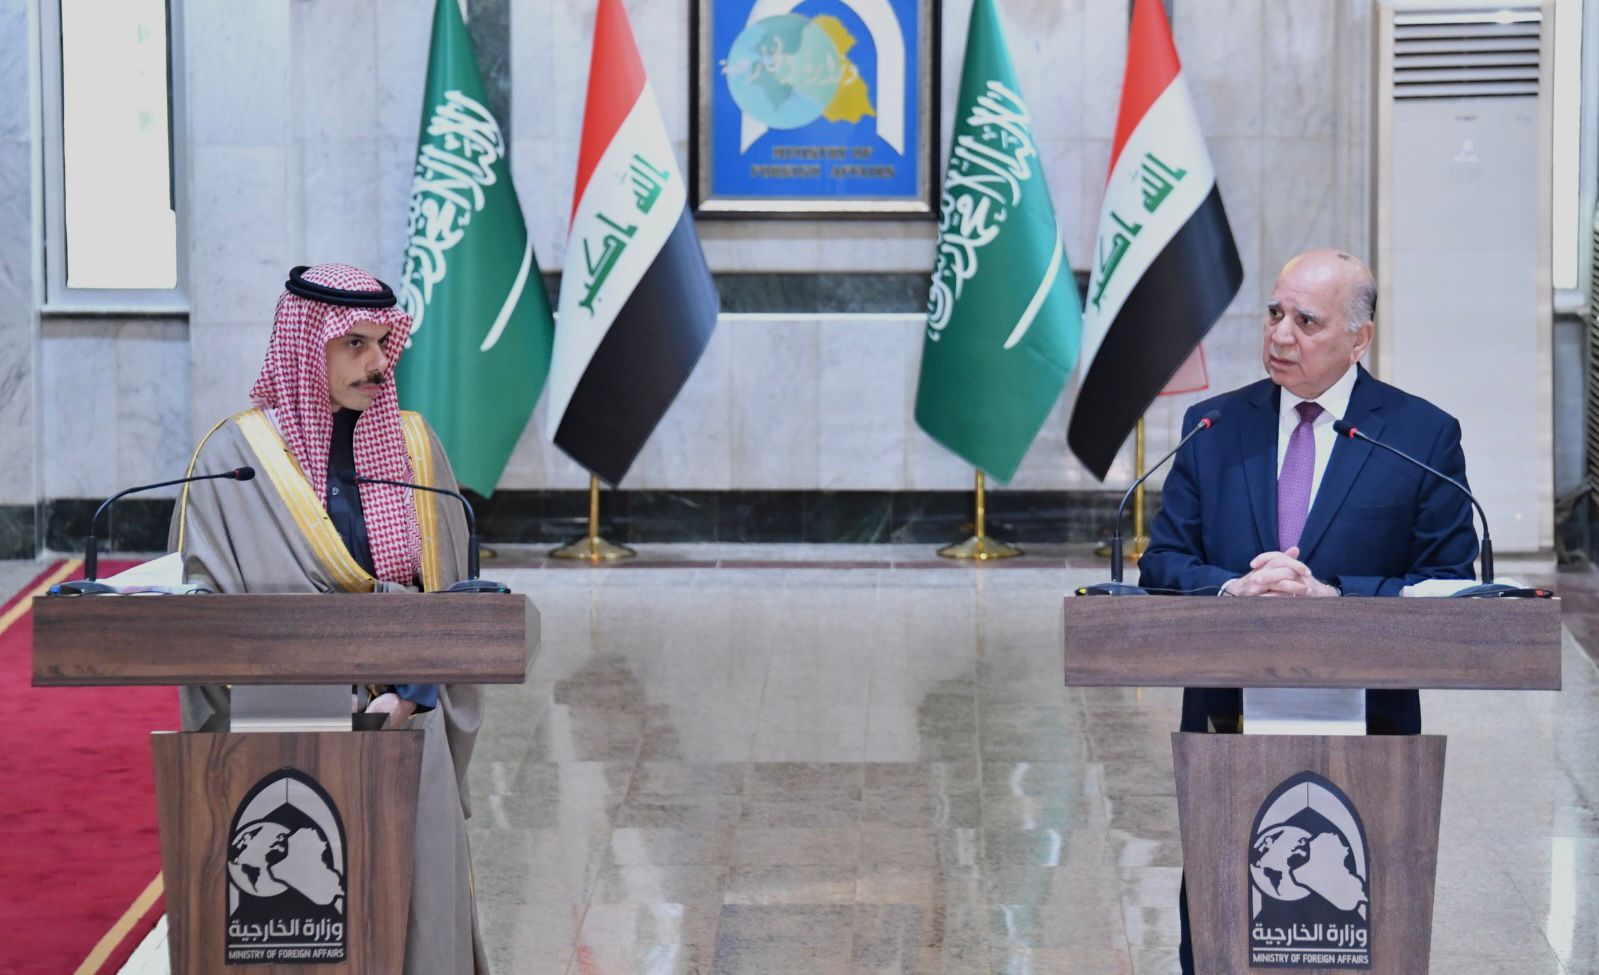 Security cooperation is ongoing between Baghdad and Riyadh: Iraq's FM